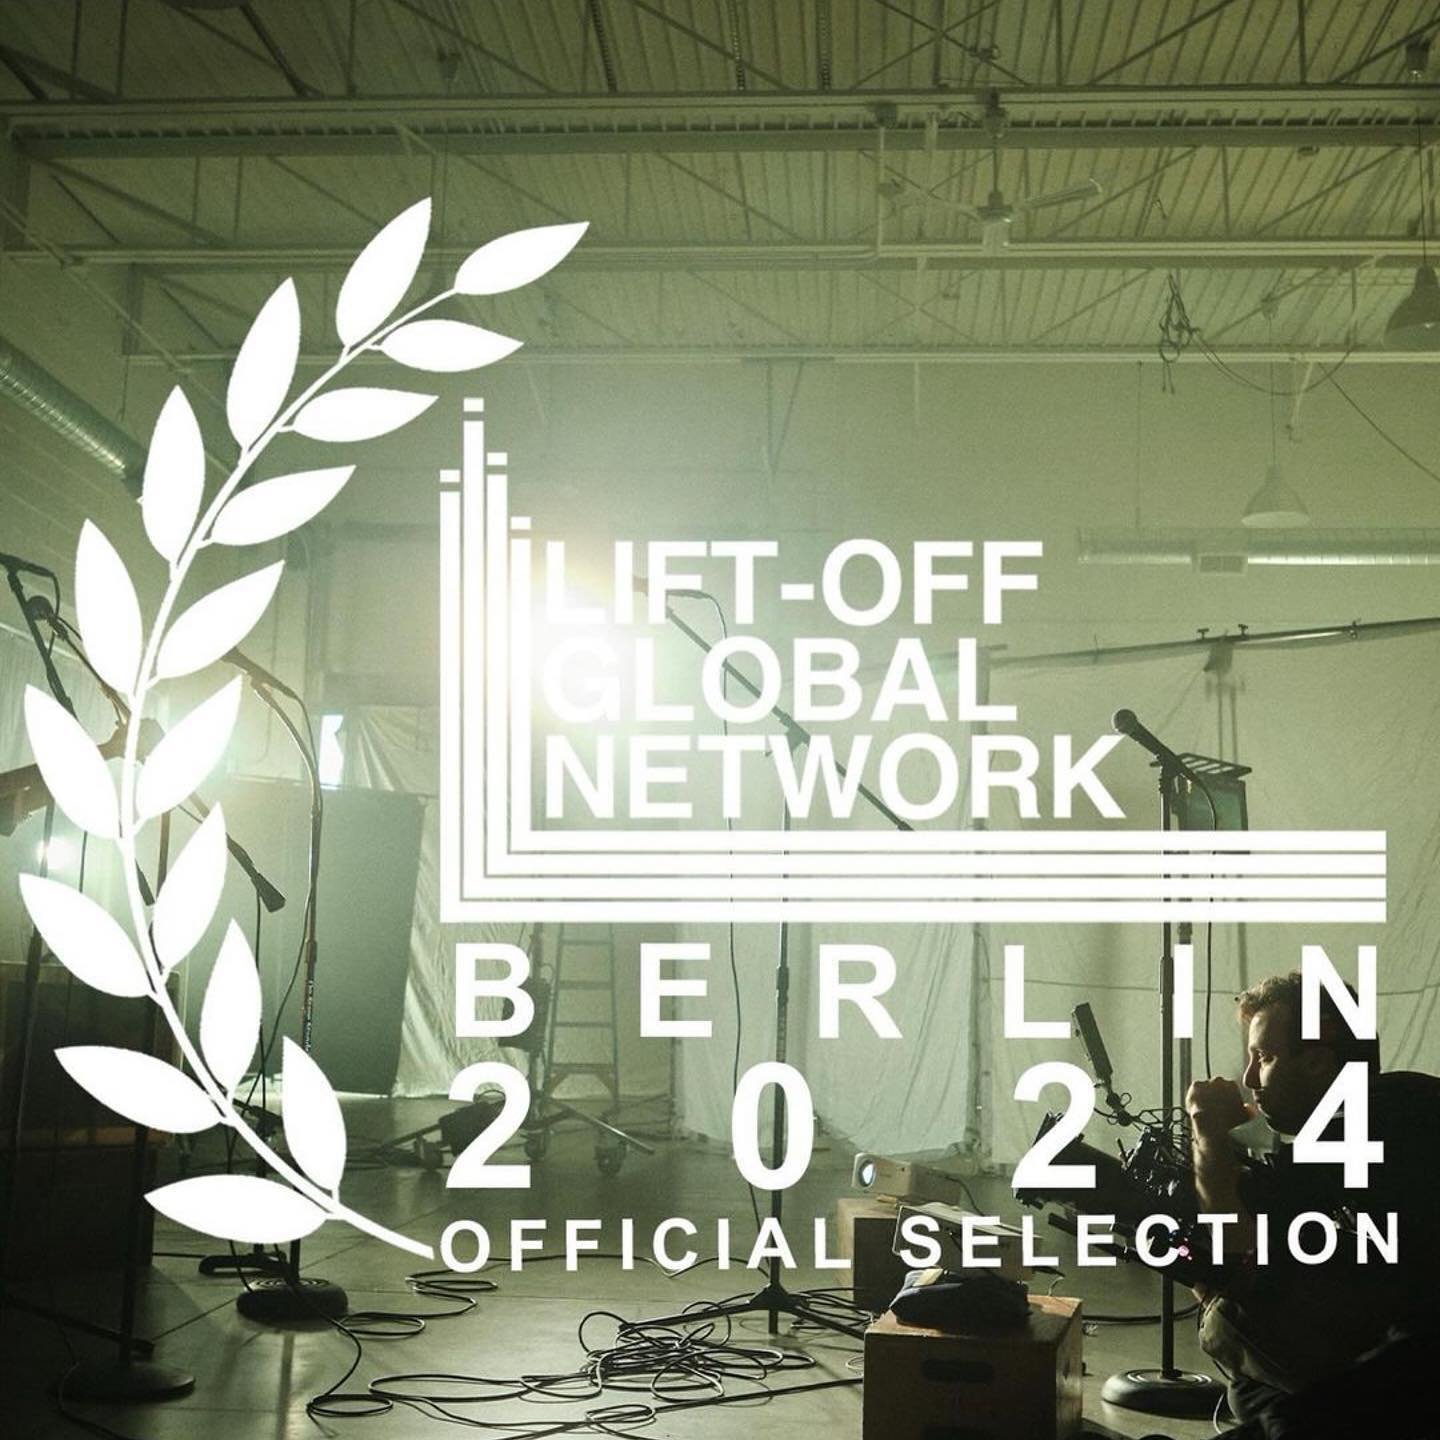 Congratulations to our director @zekeanders and the production team of &ldquo;Denmark&rdquo;. The music video is an official selection of the Berlin Lift-Off Film Festival. @liftoffglobalnetwork

#liftoffglobalnetwork #berlinliftoffilmfestival #filmf